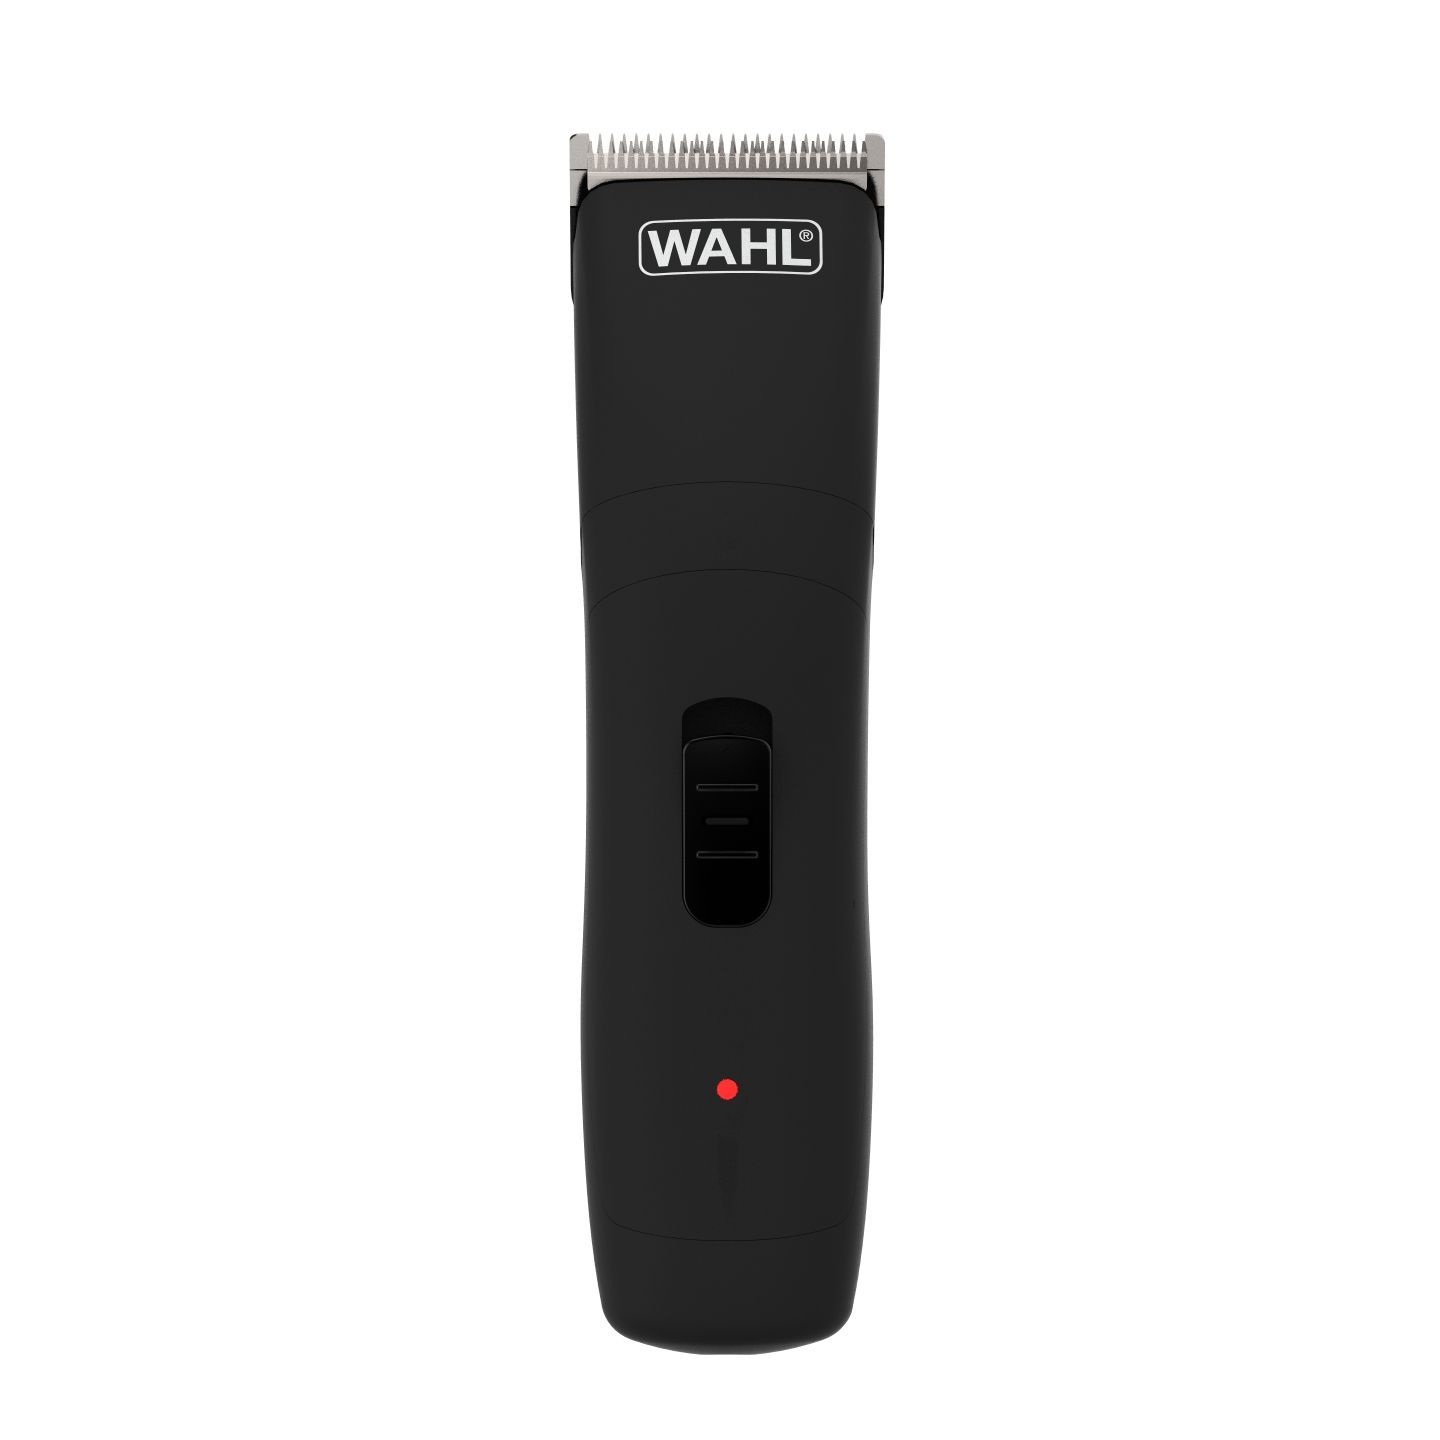 Wahl Groomease Cordless/cord Hair Clipper